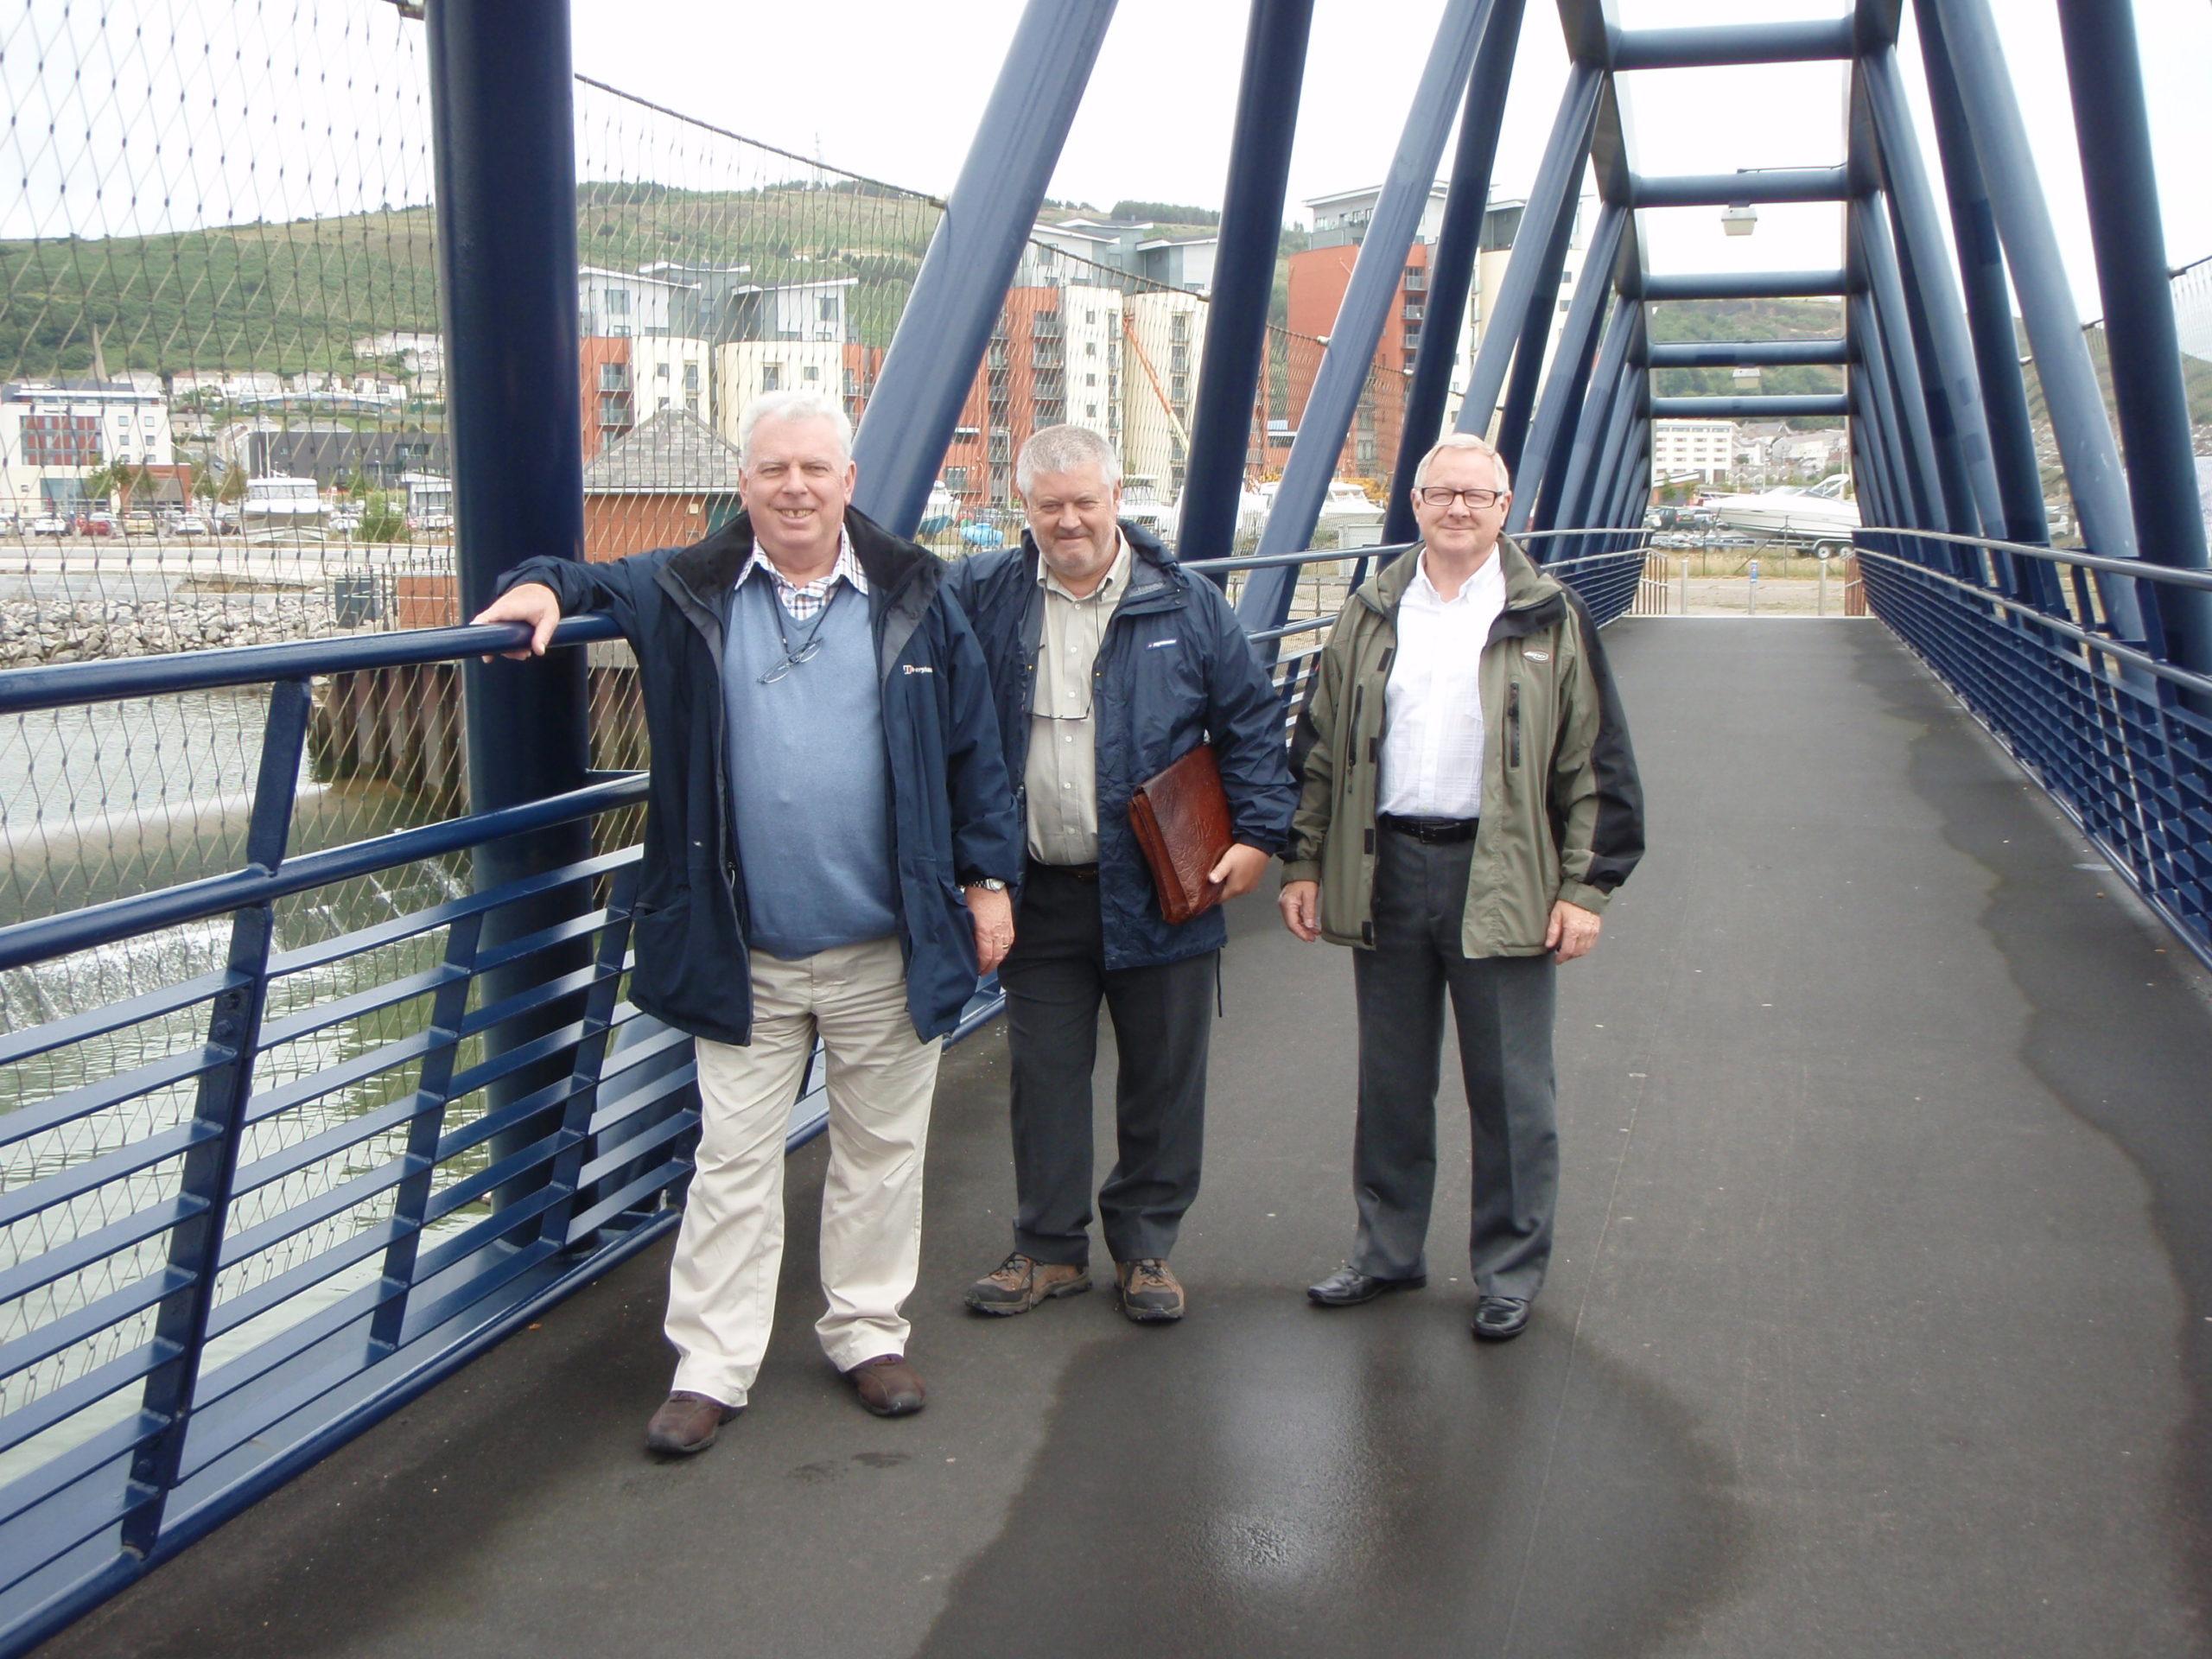 Afan Valley Angling Club members